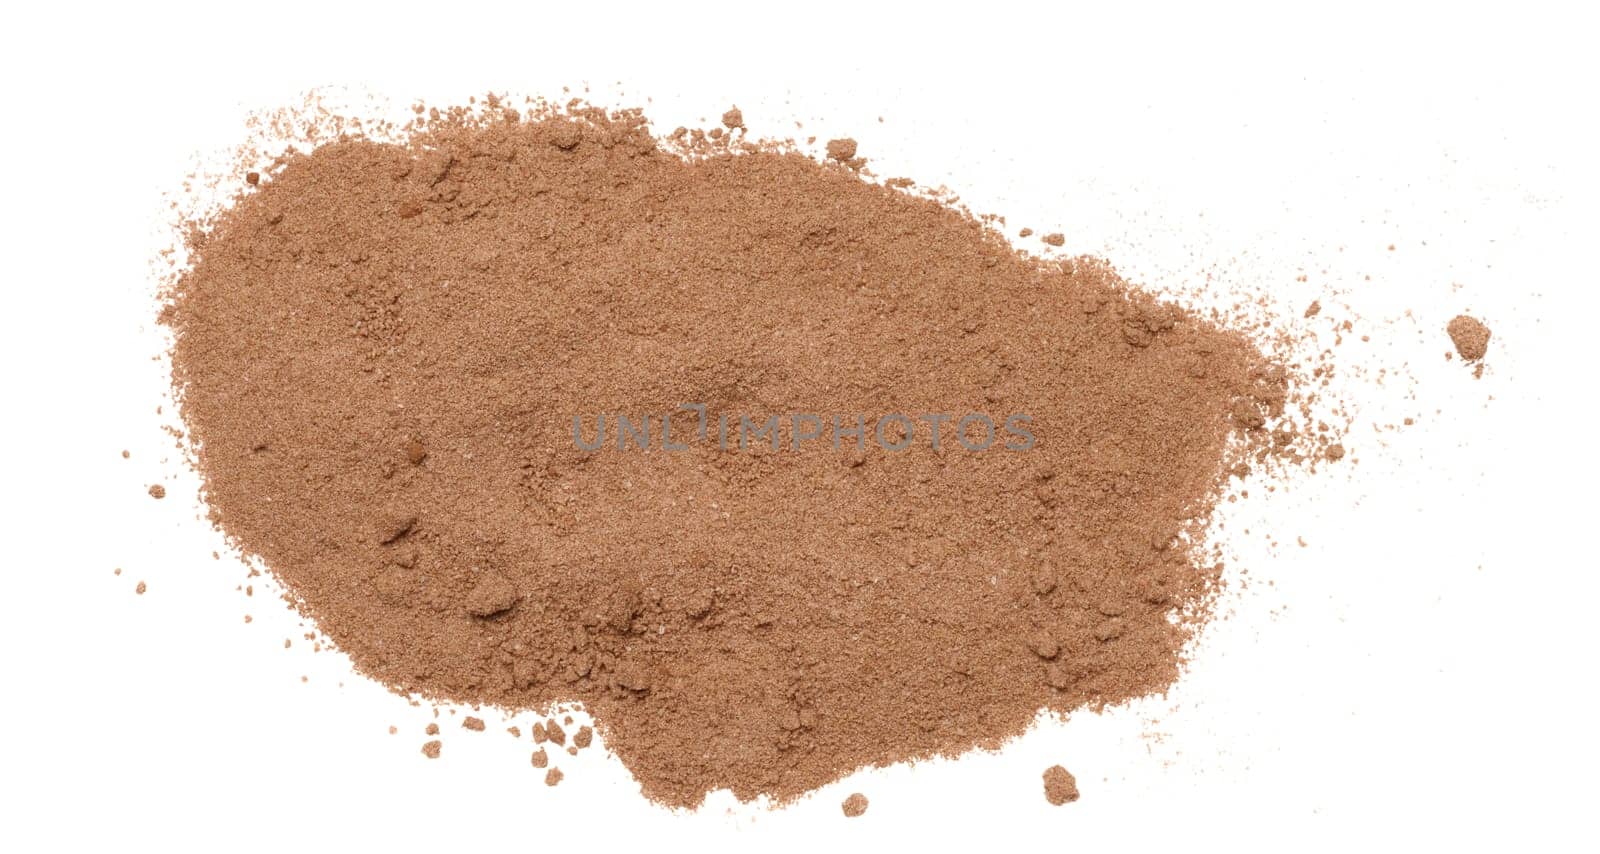 Dry ground cocoa powder scattered on an isolated background by ndanko